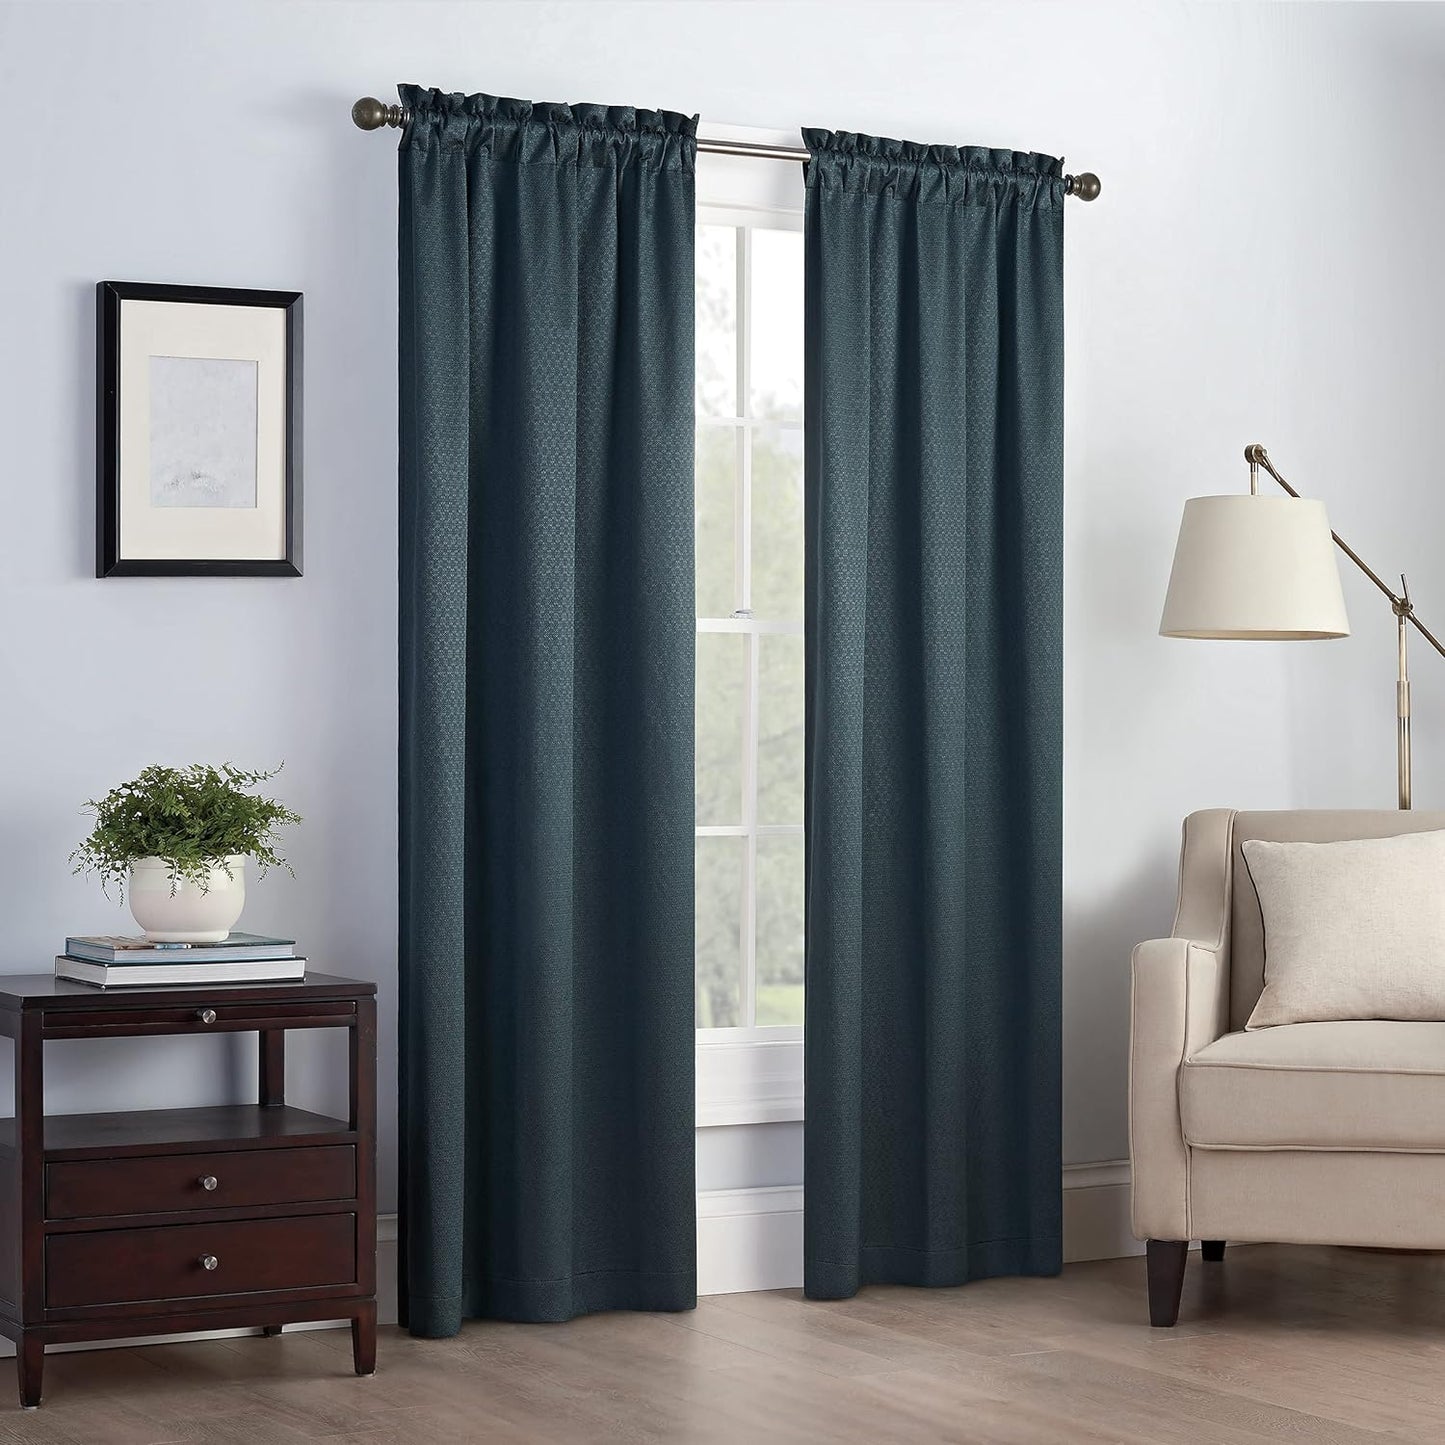 Eclipse Canova Thermal Insulated Single Panel Rod Pocket Darkening Curtains for Living Room, 42 in X 63 In, CHARCOAL  Keeco LLC Forest 42 In X 63 In 